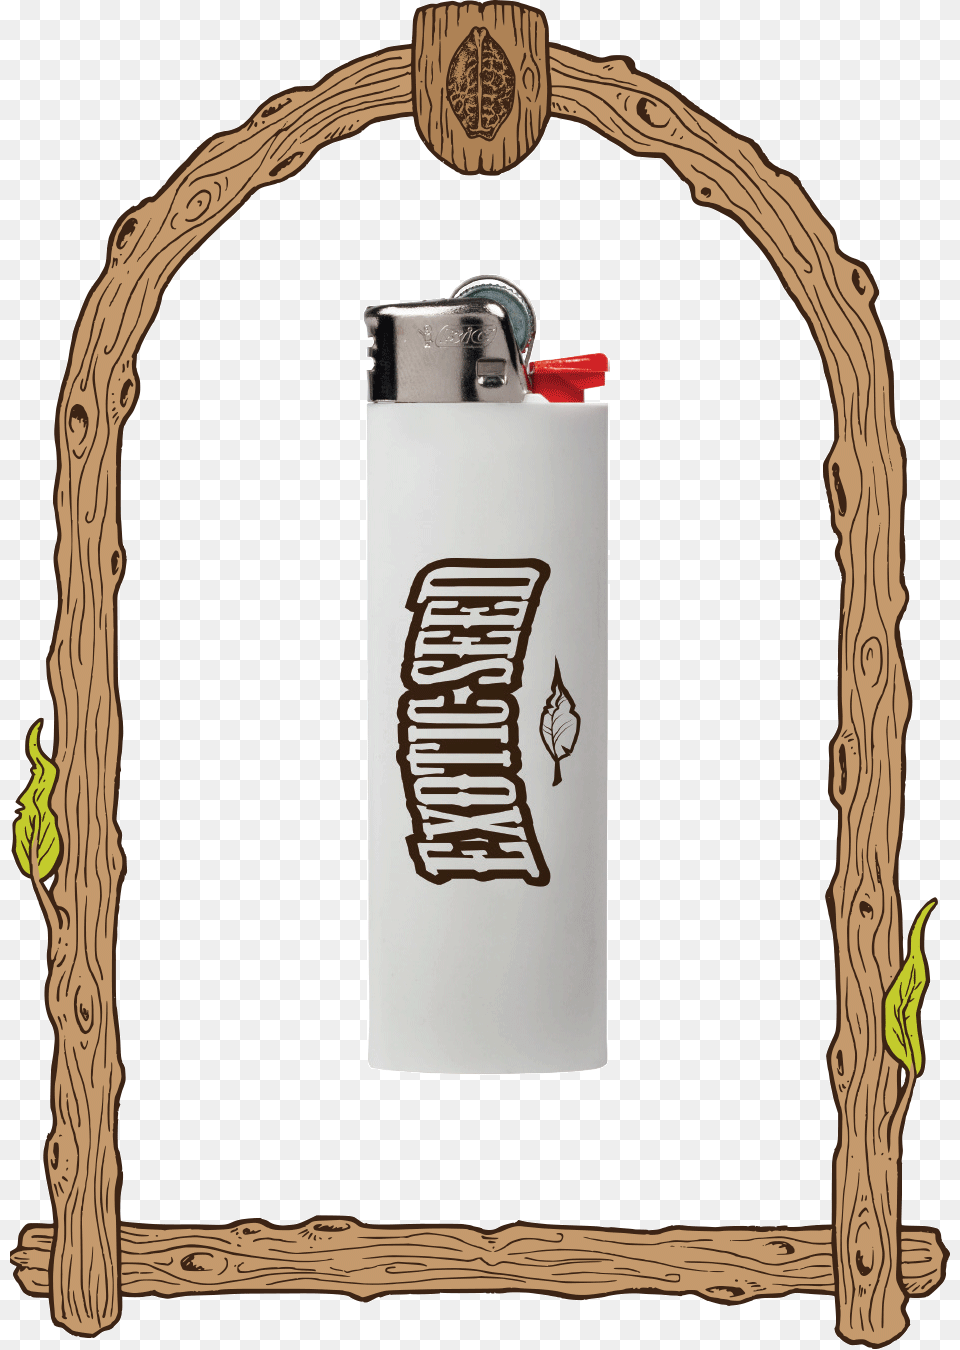 Bic Lighter Exotic Seed Logo Seed, Bottle, Cosmetics, Perfume Png Image